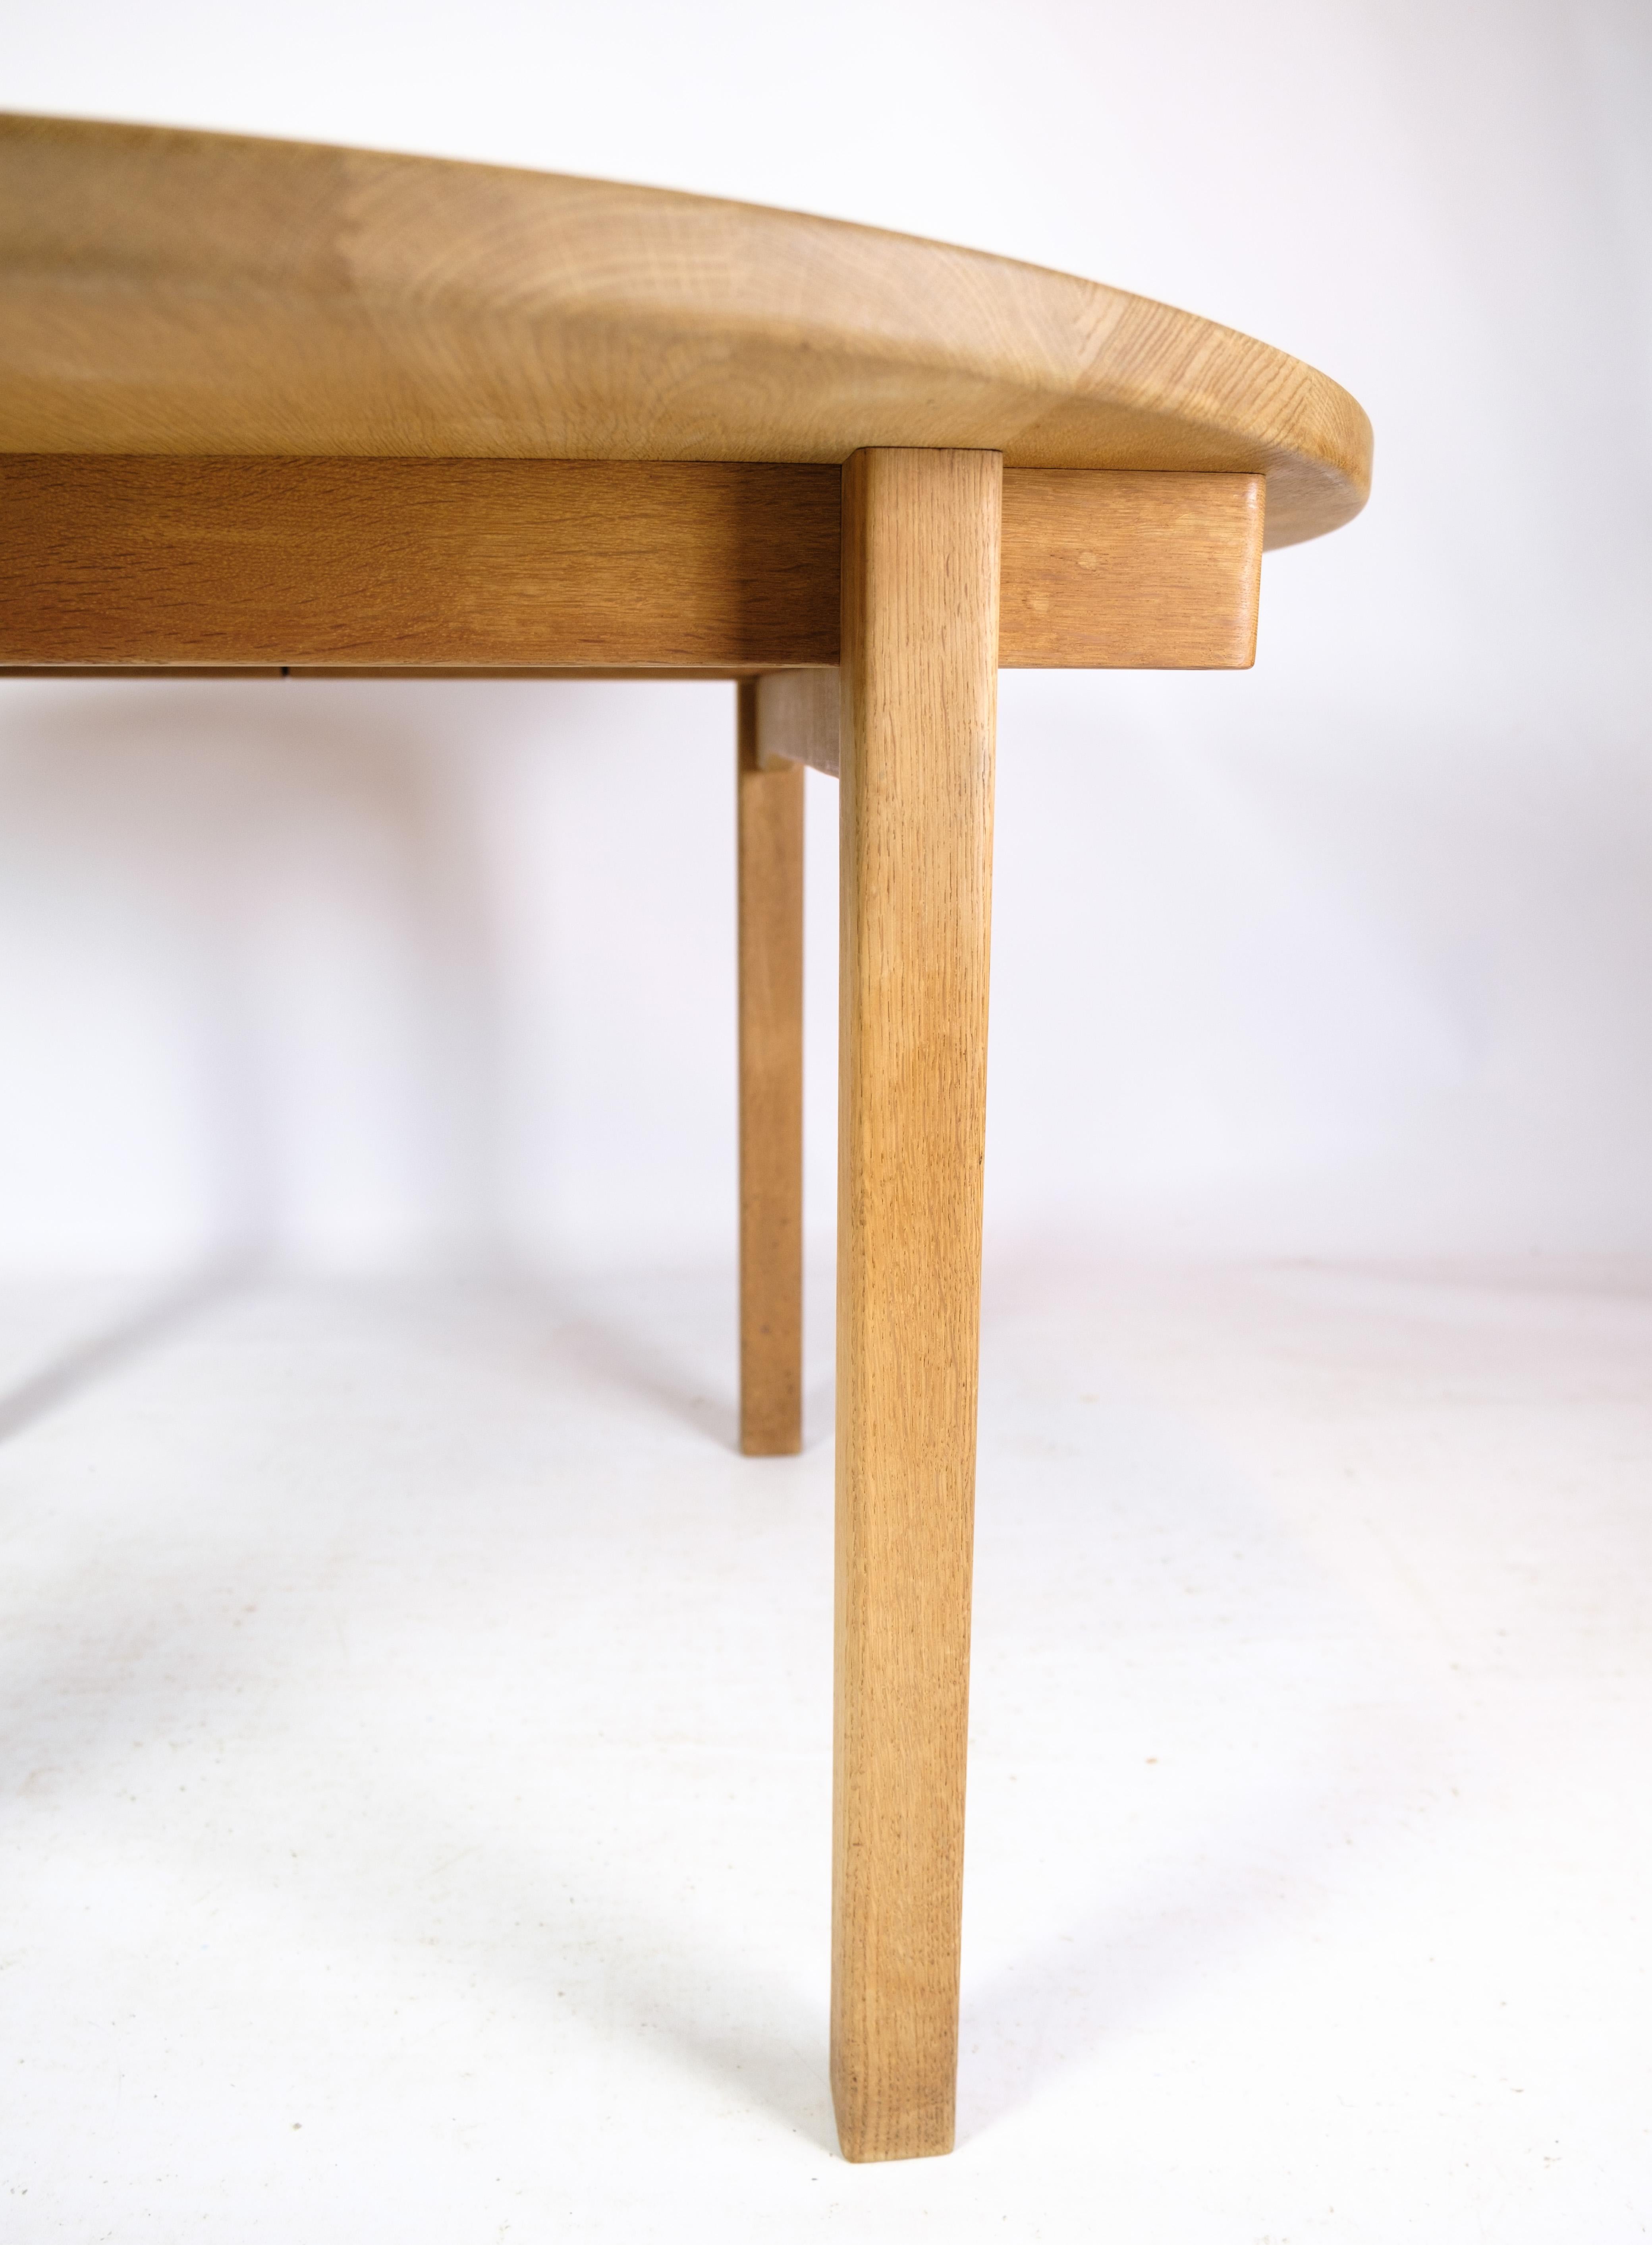 Mid-20th Century Dining Table in Solid Oak Designed by Kurt Østervig from Around the 1960s